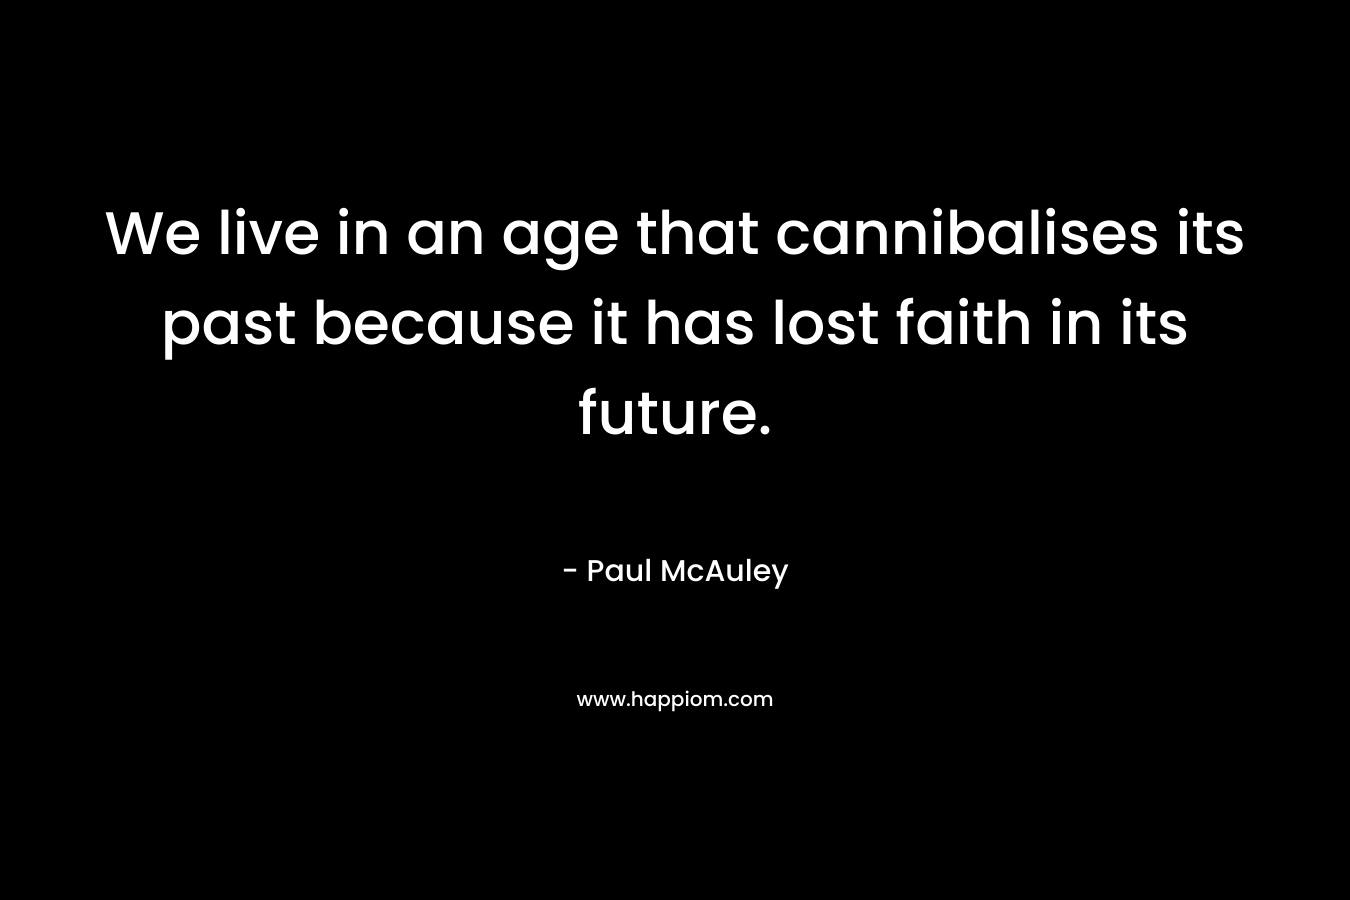 We live in an age that cannibalises its past because it has lost faith in its future.